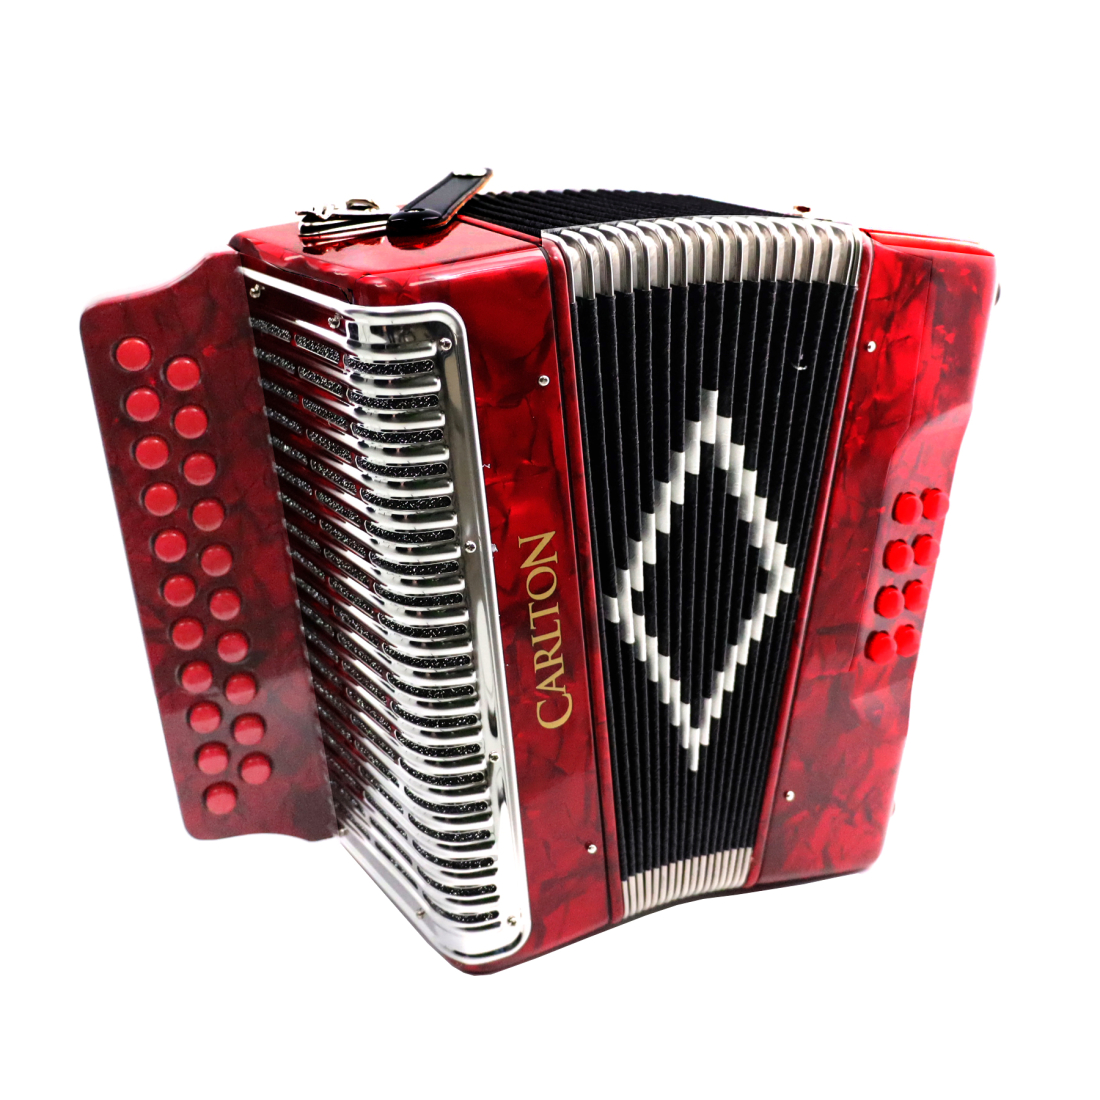 G/C Diatonic Accordion with 2 Rows - Red